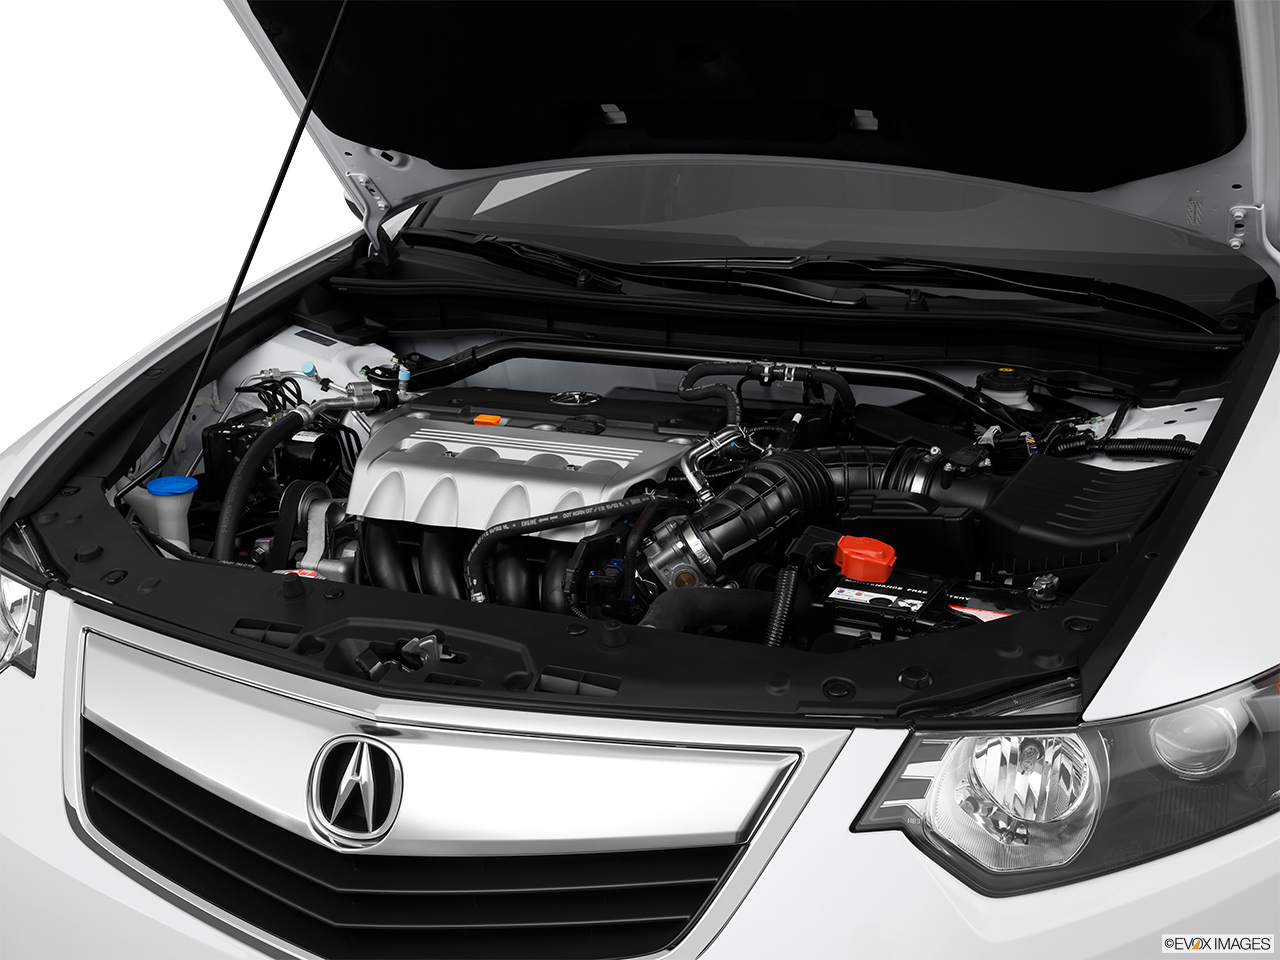 2013 Acura TSX Special Edition 5-Speed Automatic Engine. 